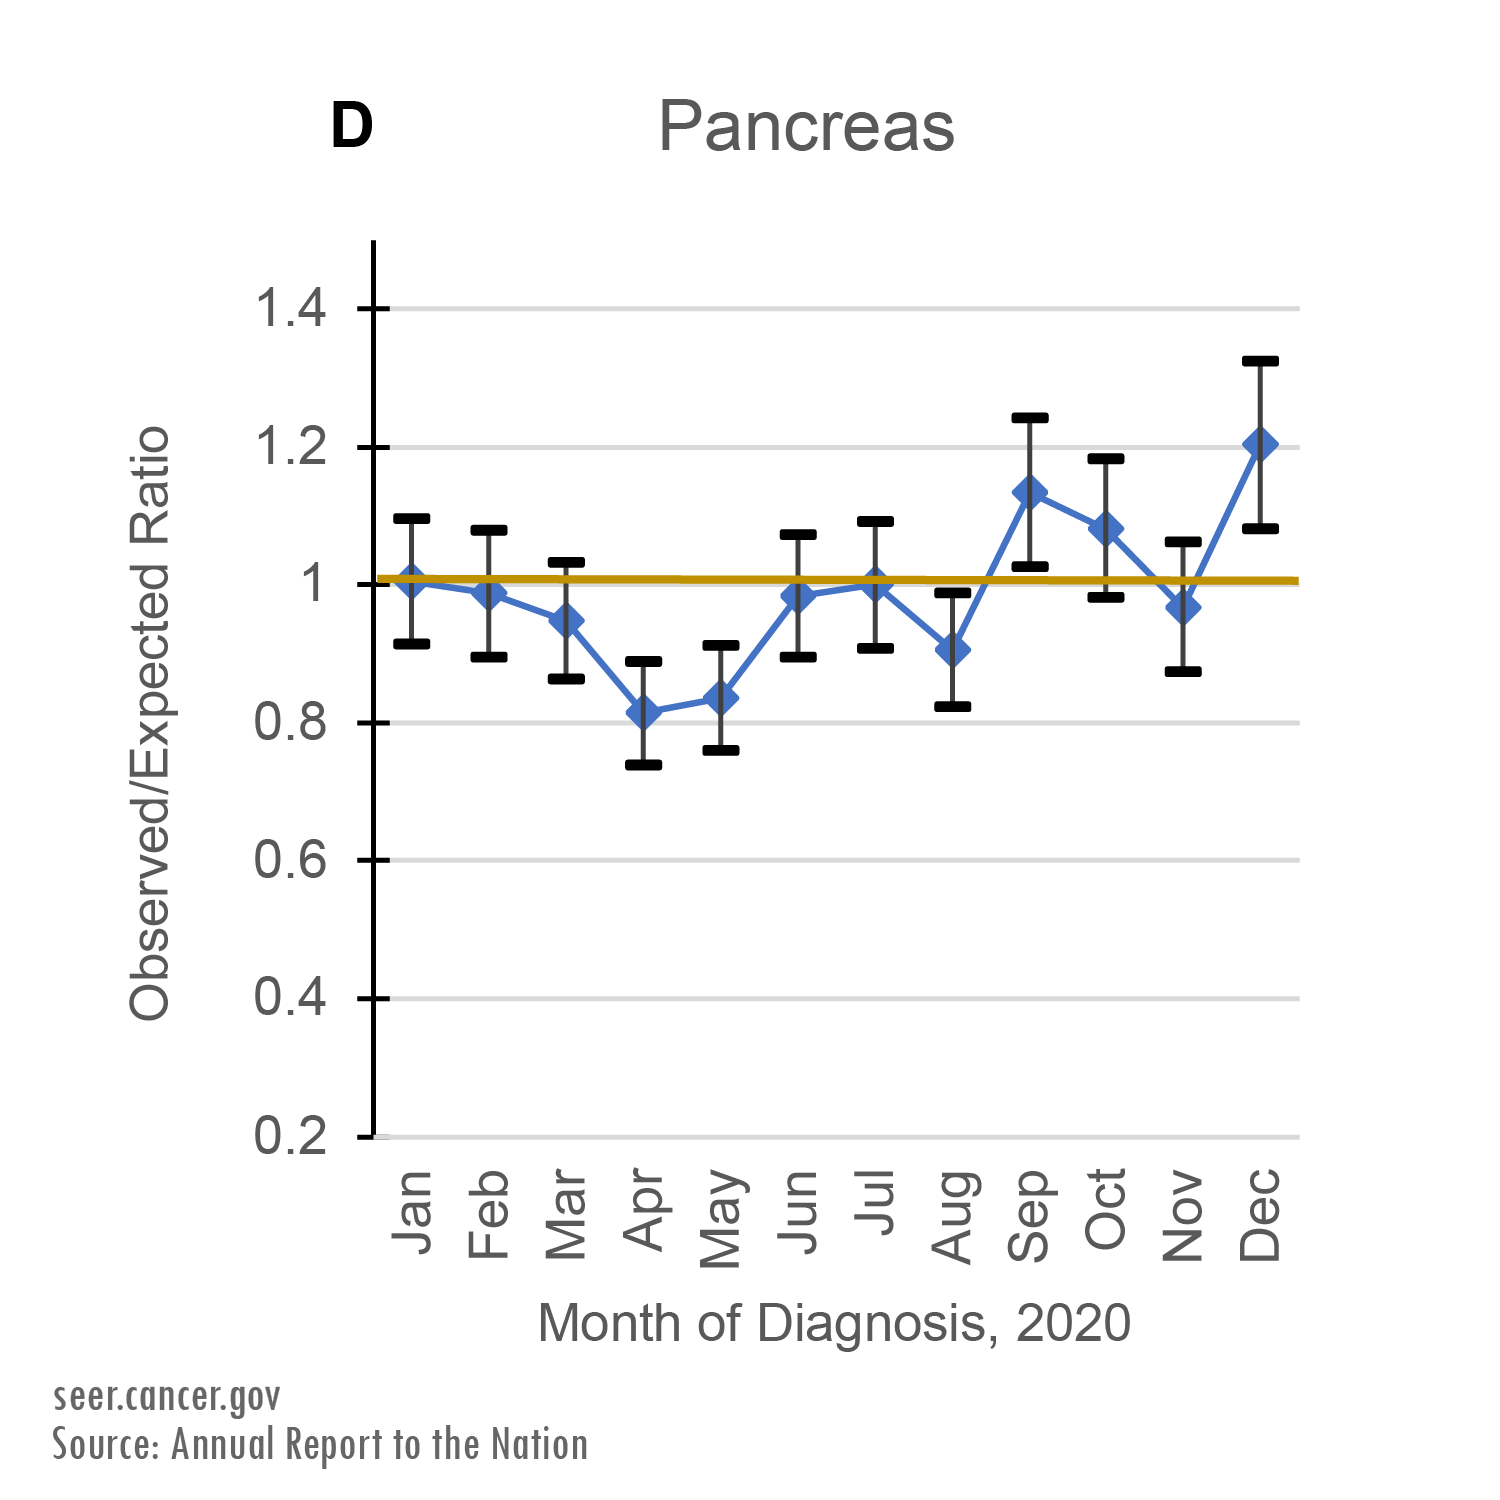 Observed/Expected Ratio of Pancreatic cancer diagnoses by Month of Diagnosis, 2020. Between March and May of 2020, cancer registries recorded far fewer cases than expected. New cases of pancreatic cancer fell by about 20% in April 2020. While the rate of new cancer diagnoses hovered around predicted levels in the second half of 2020, it did not completely make up for the drop seen between March and May.